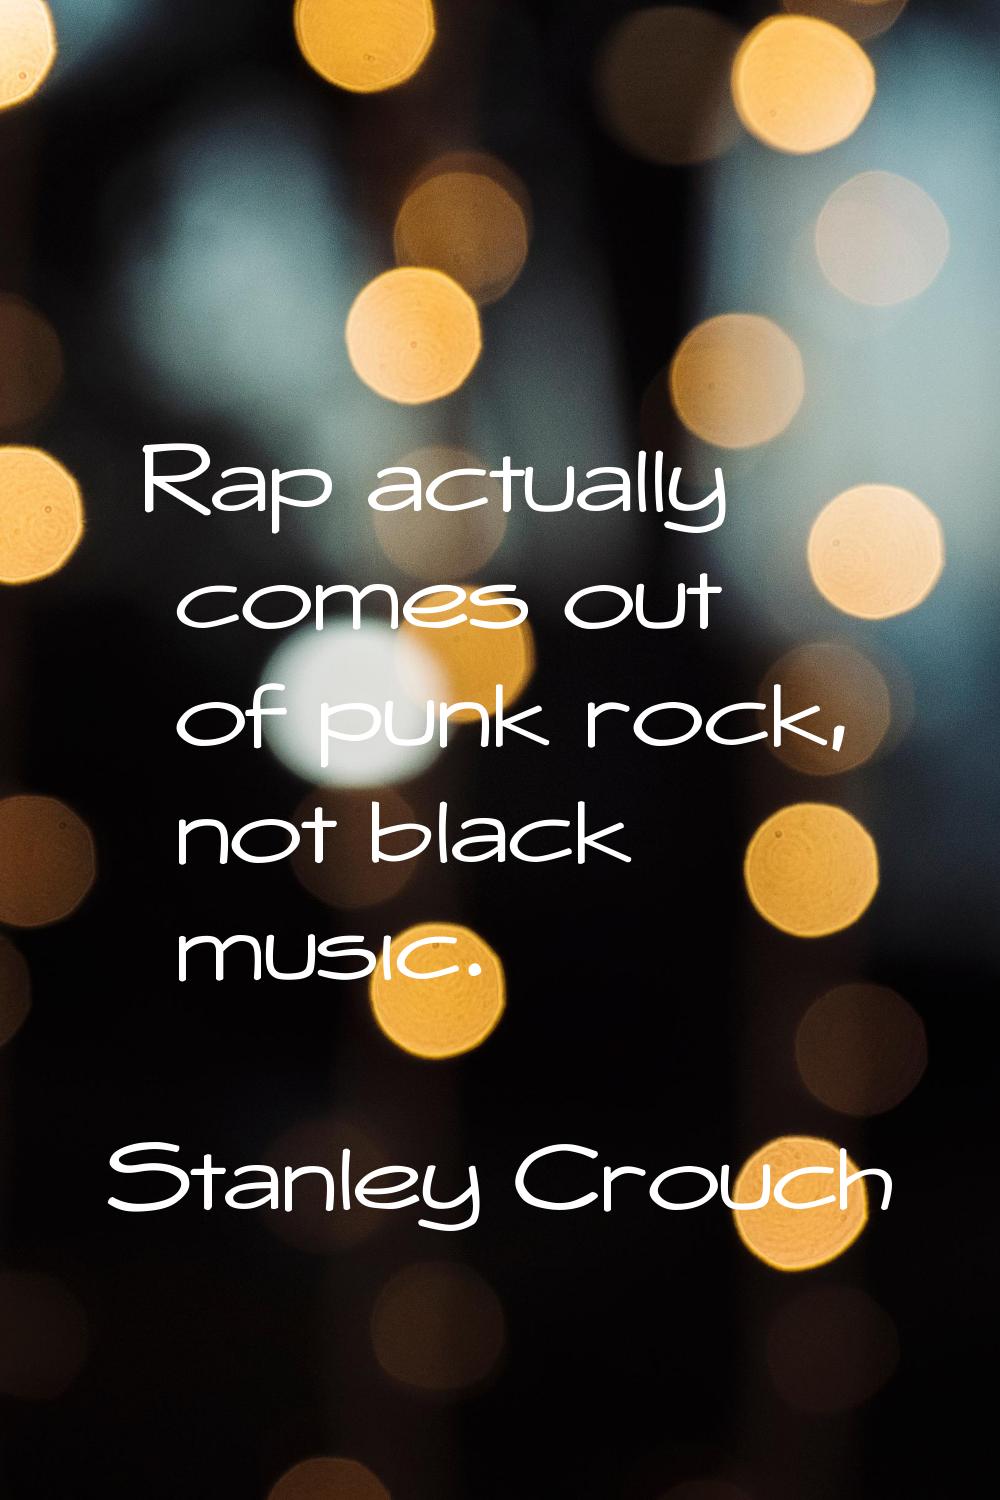 Rap actually comes out of punk rock, not black music.